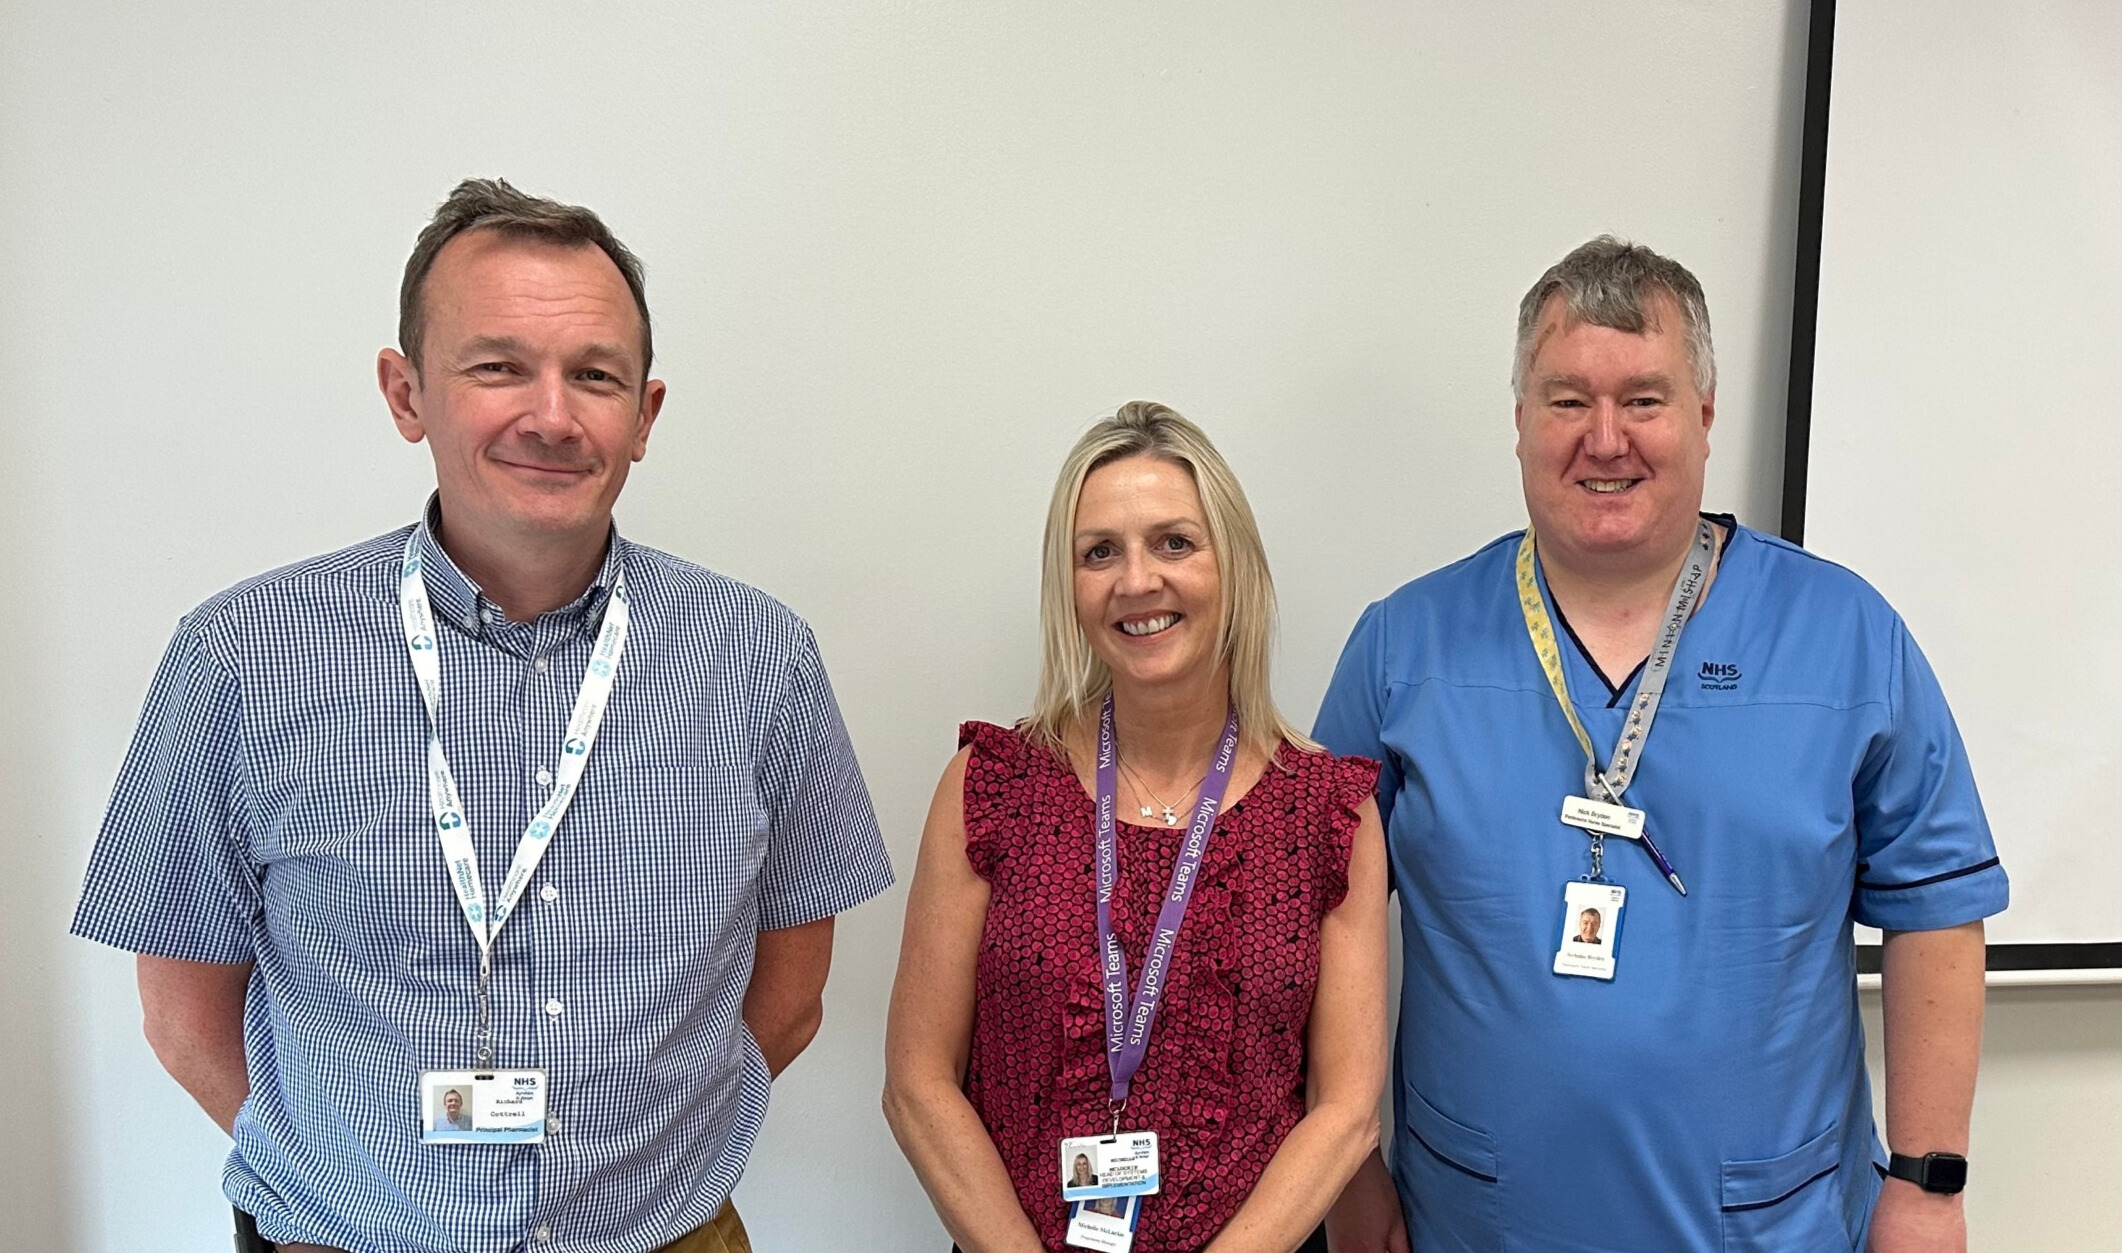 3 members of NHS staff stood in a row smiling.